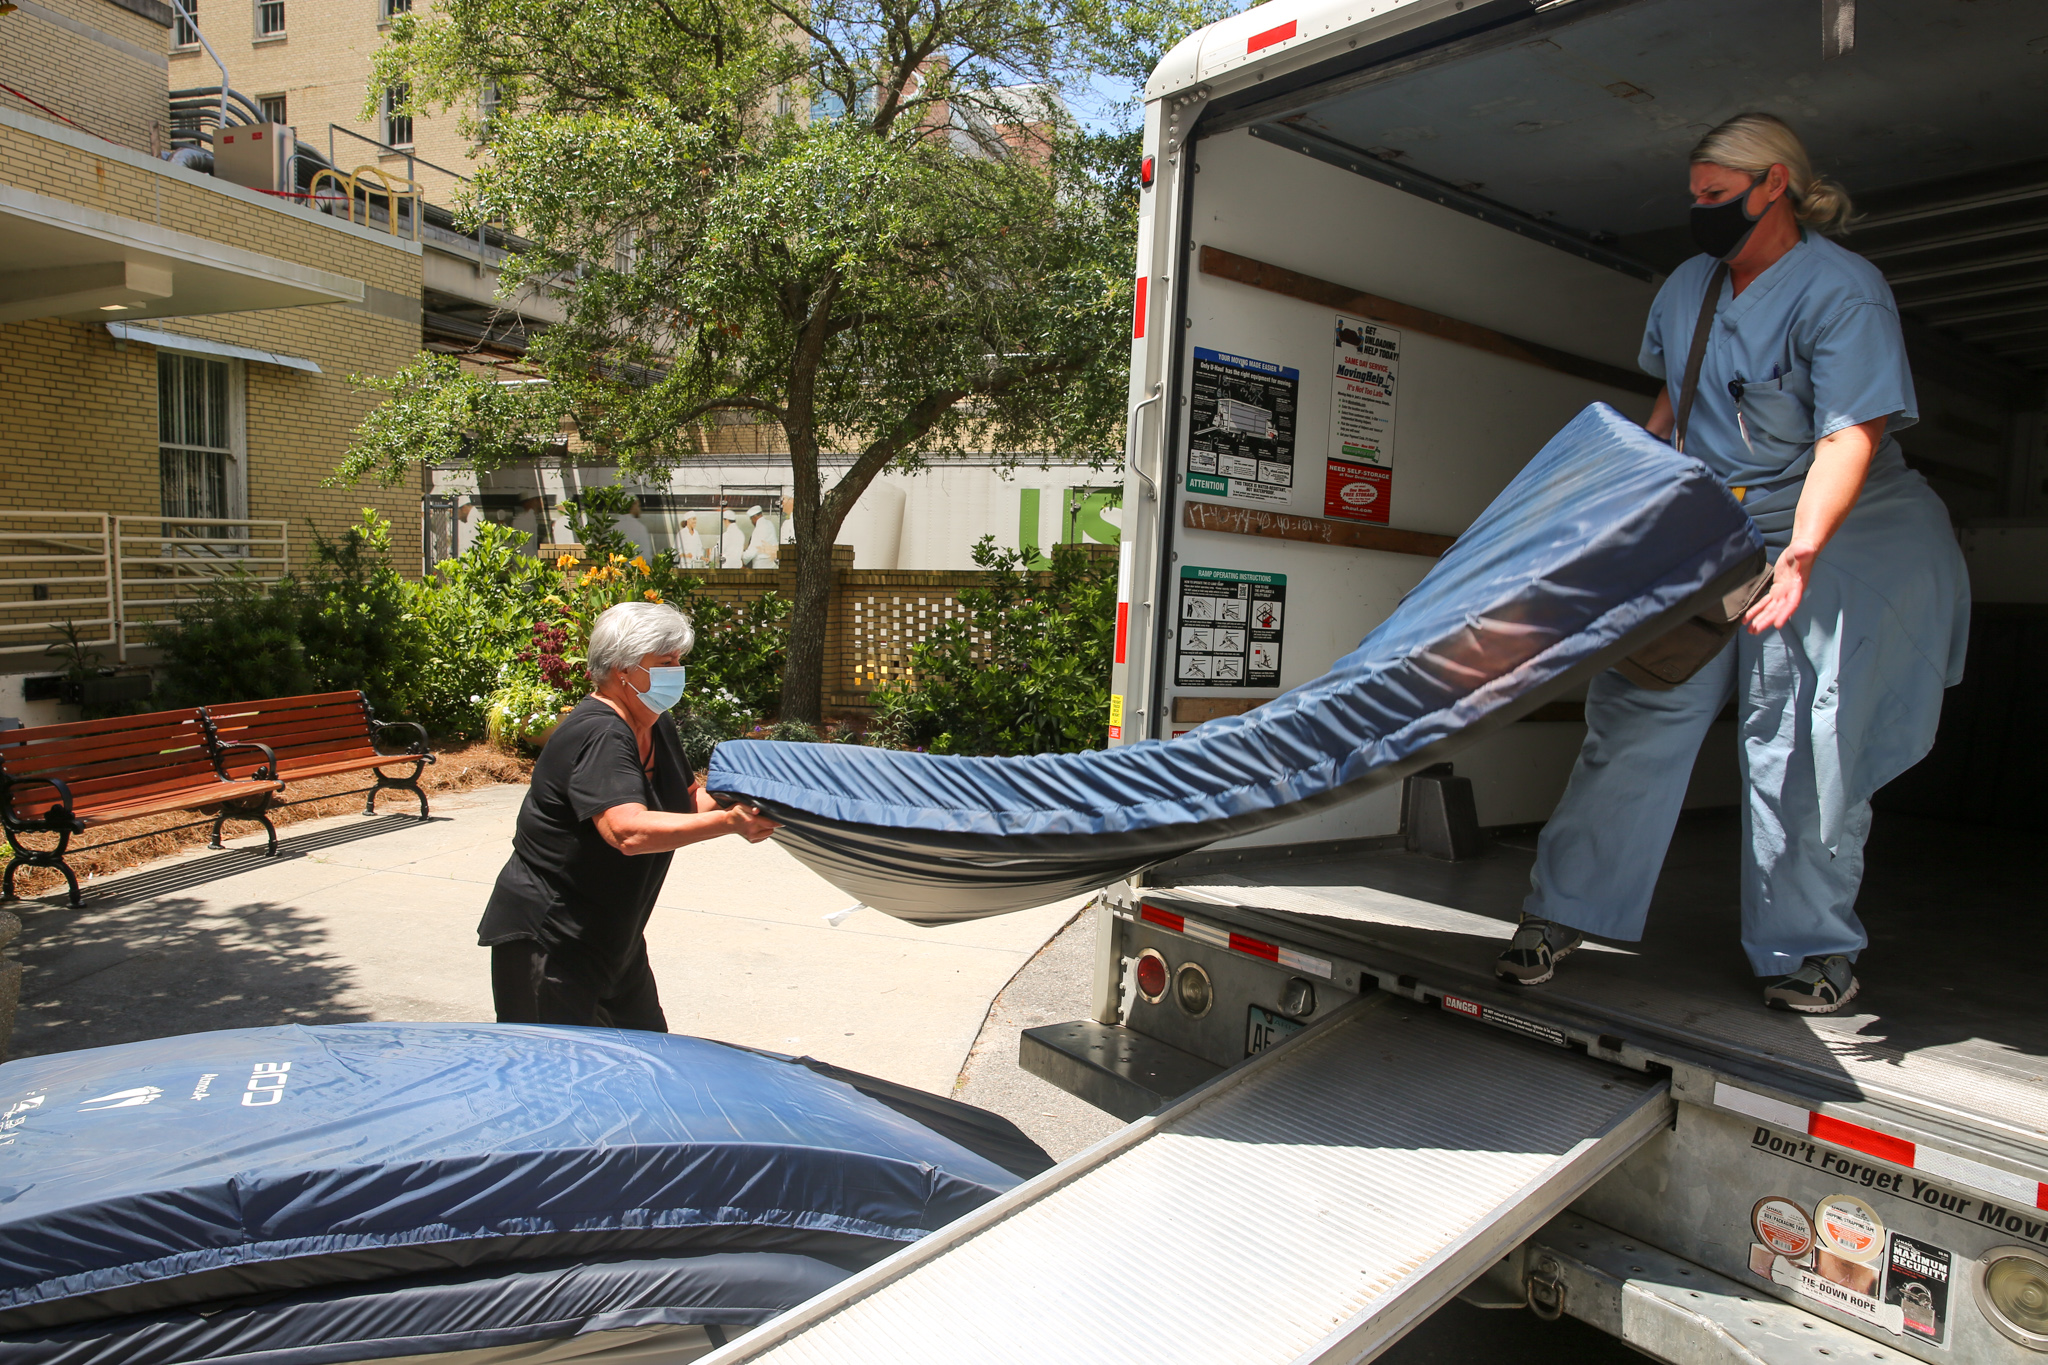 workers loading beds